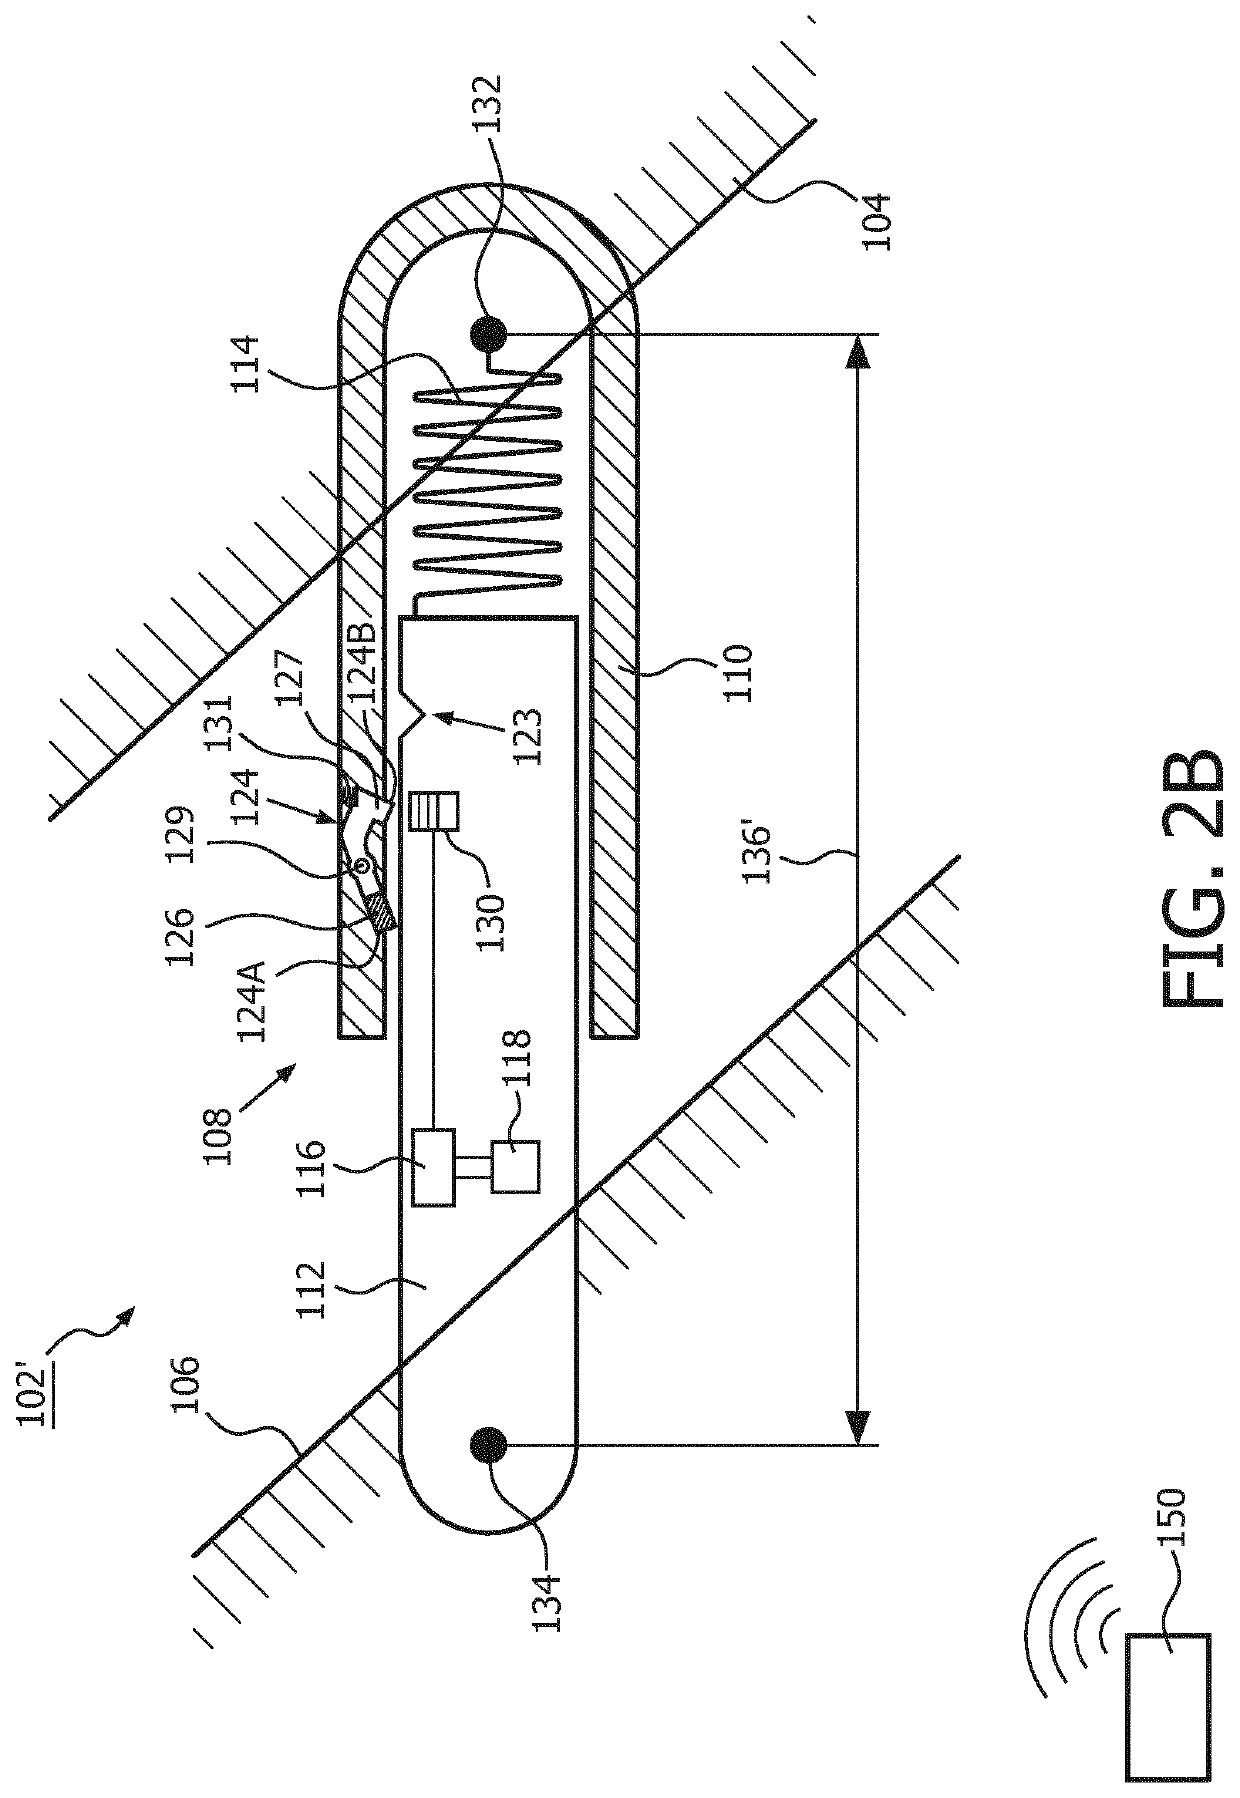 Mandibular advancement device and method of adjusting a dimension of a coupling assembly of a mandibular advancement device